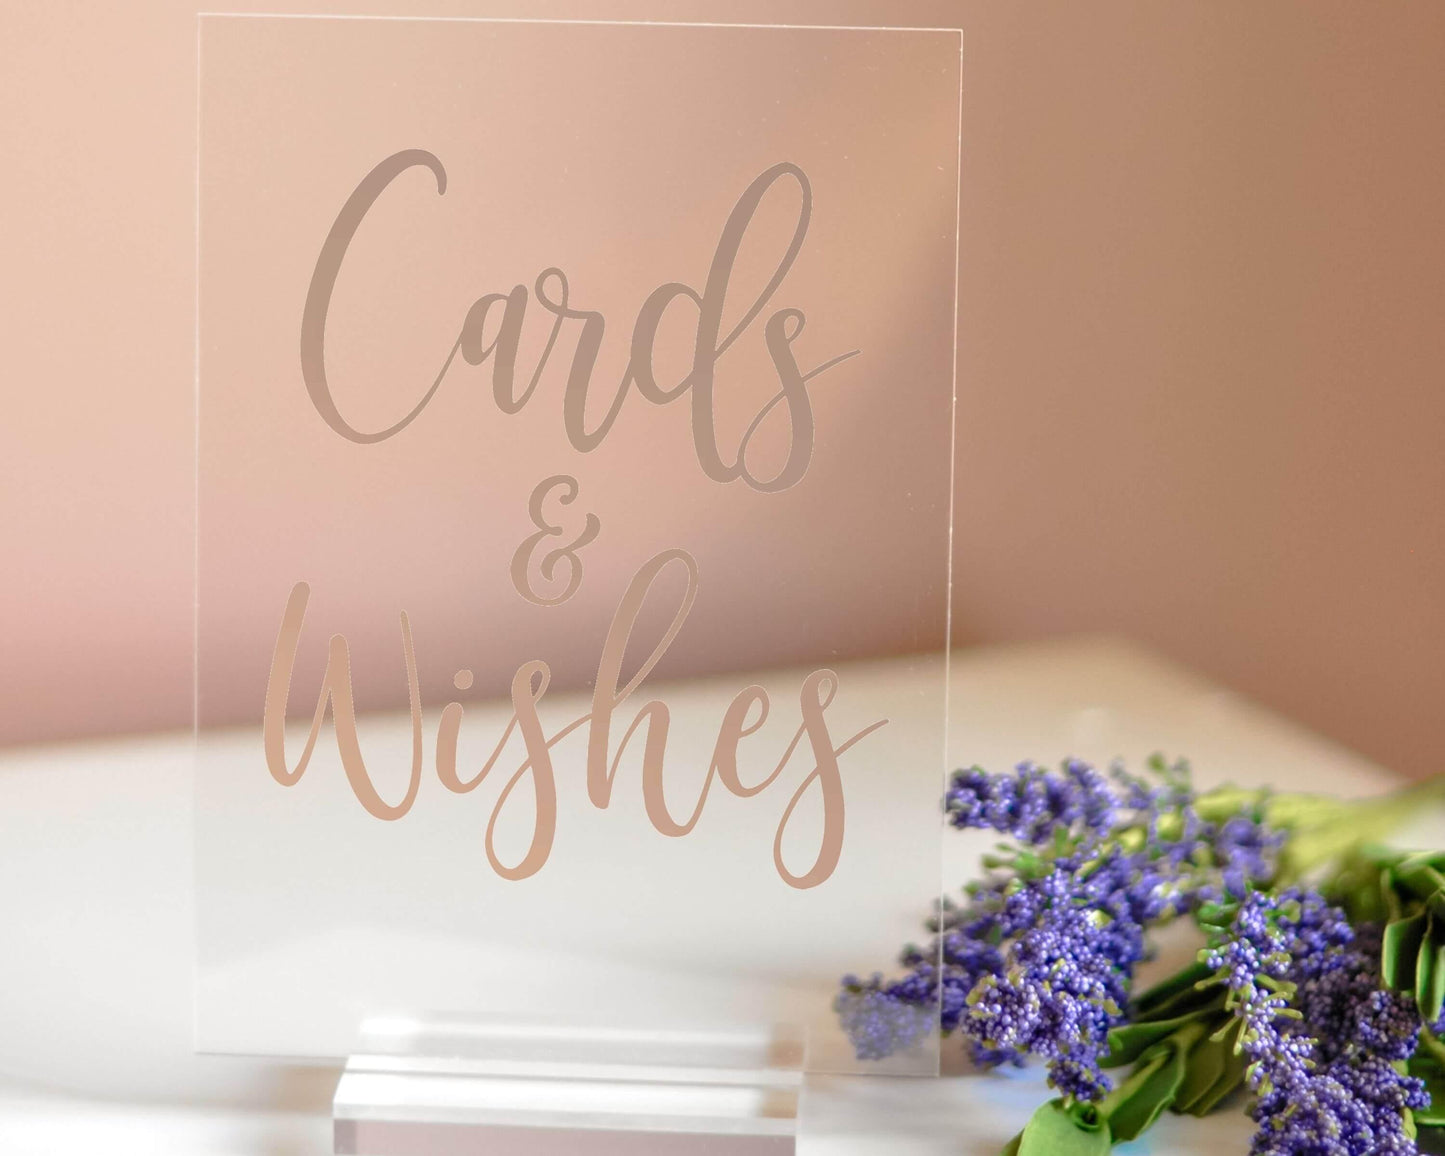 Cards and Wishes Acrylic Sign with Clear Background | 5 X 7"